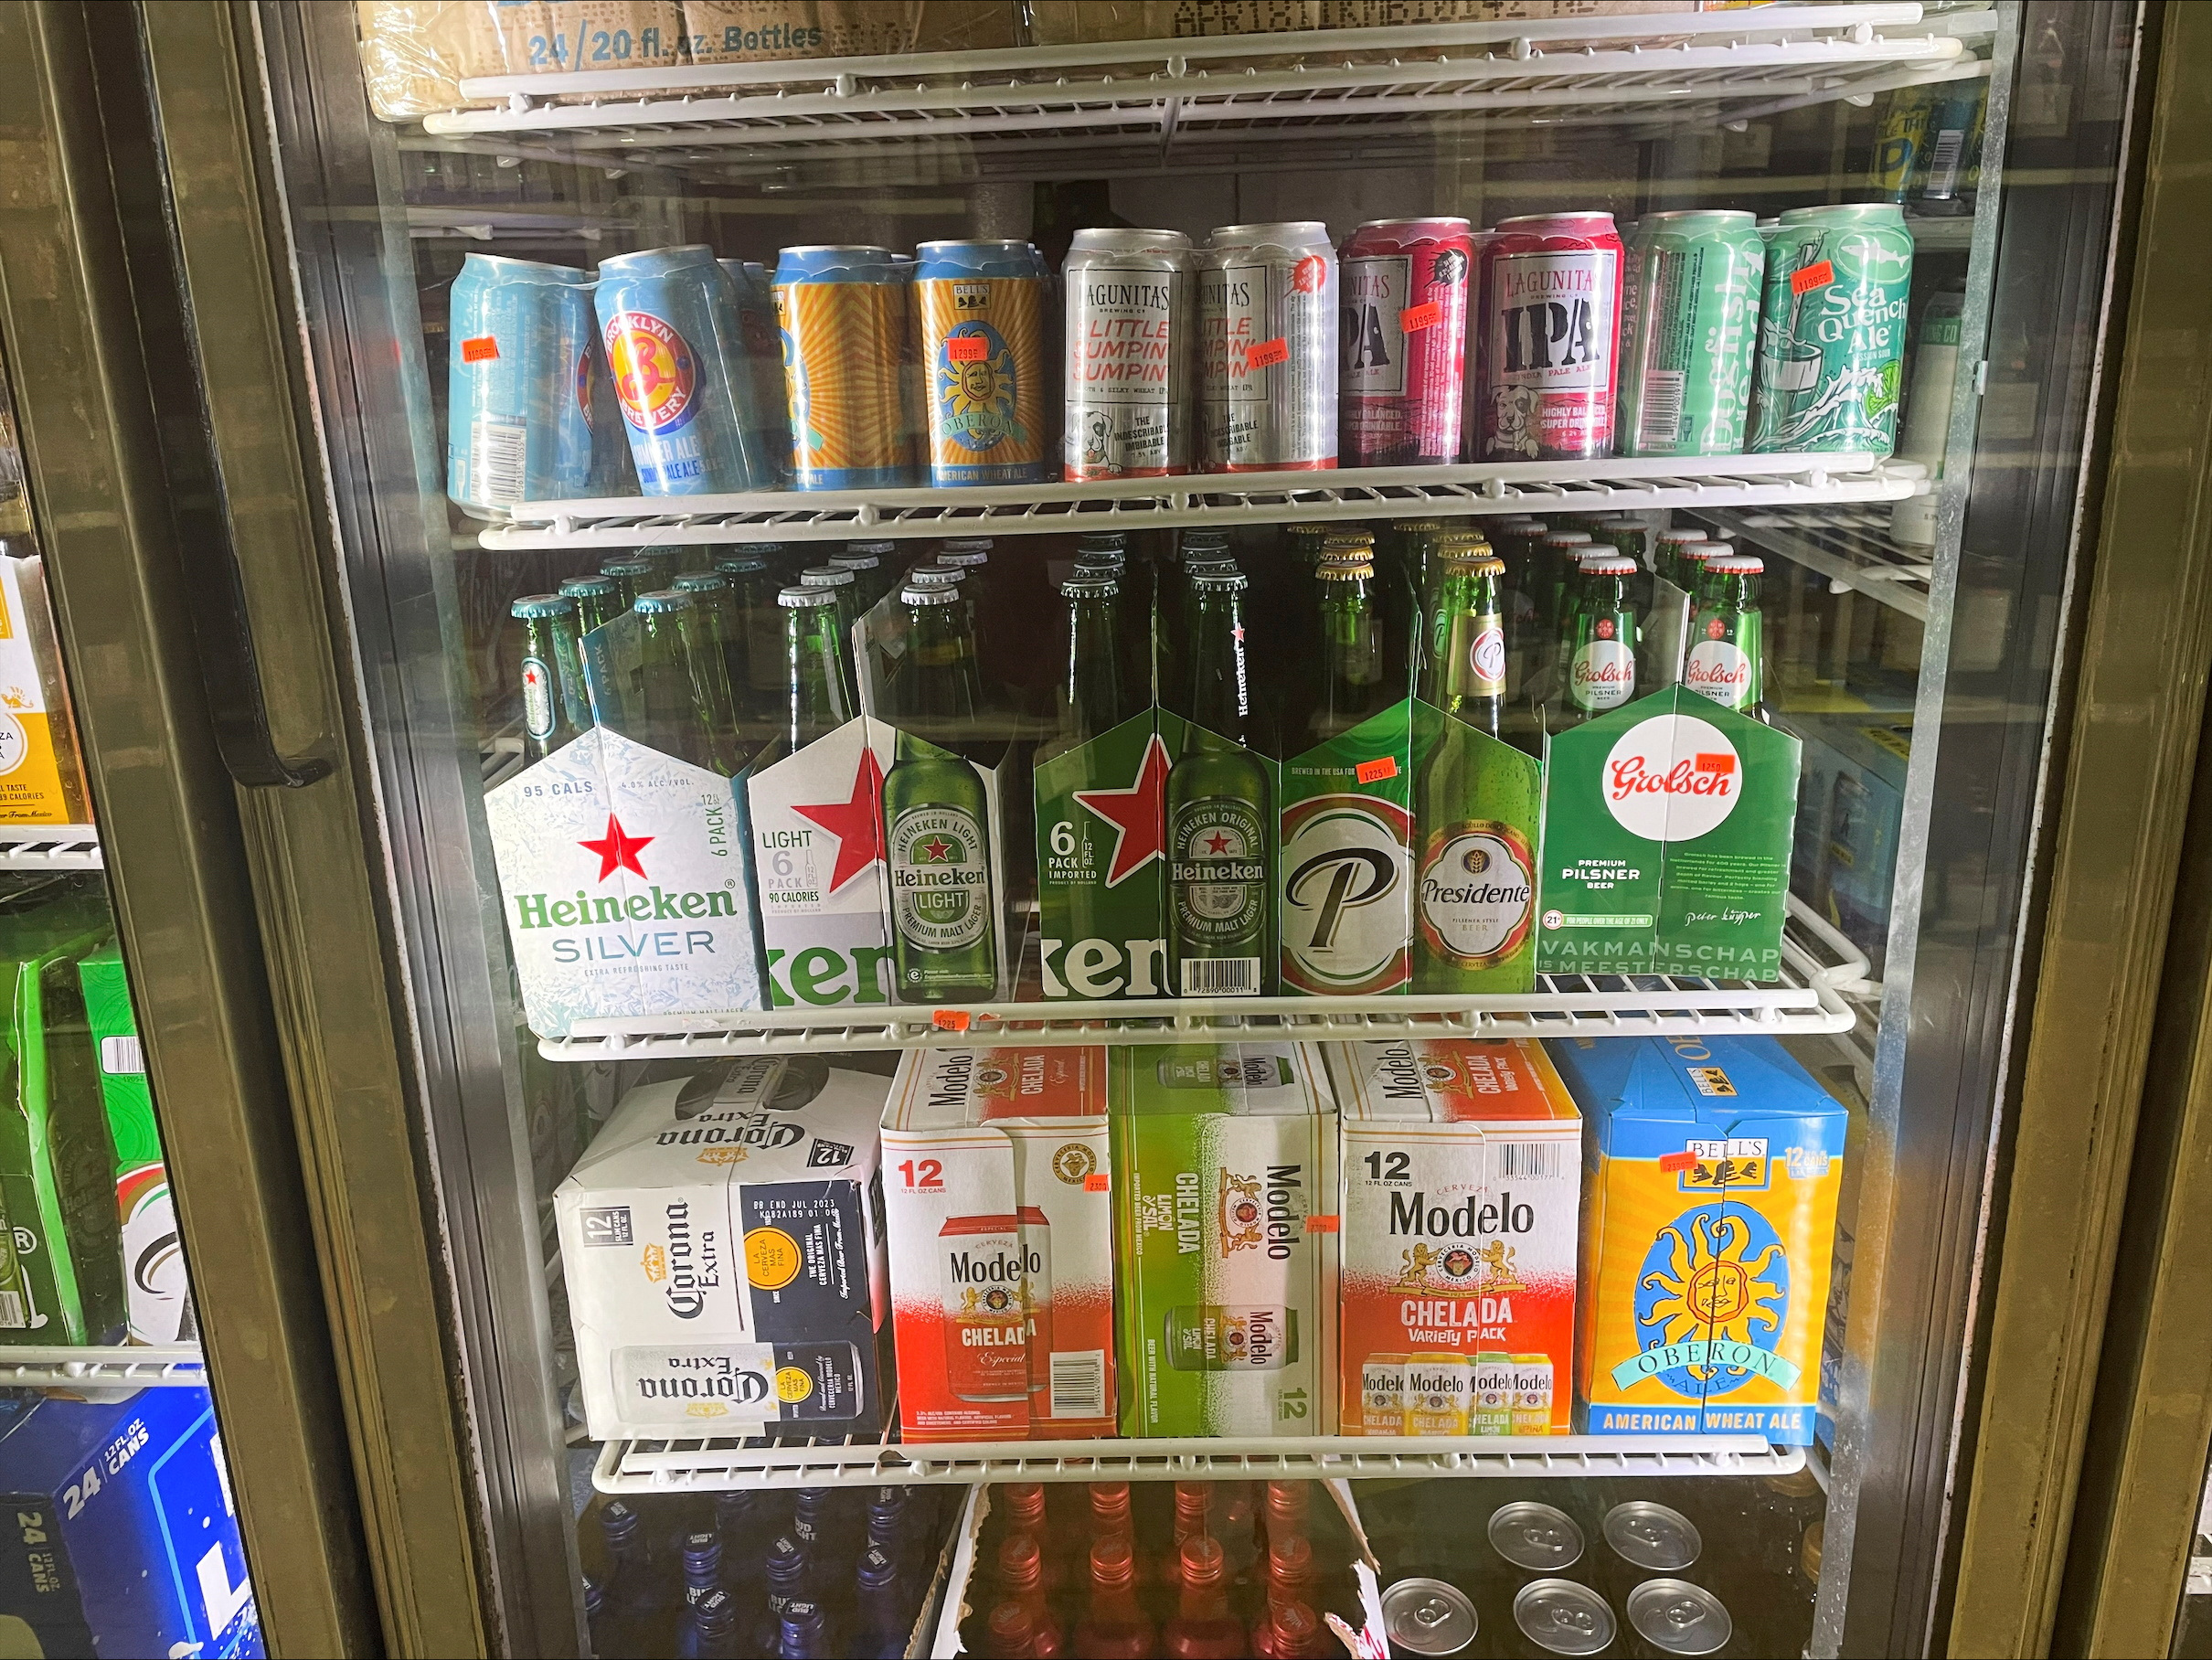 Bottles of Heineken Silver are seen in a fridge among other beers at convenience store in Jersey City